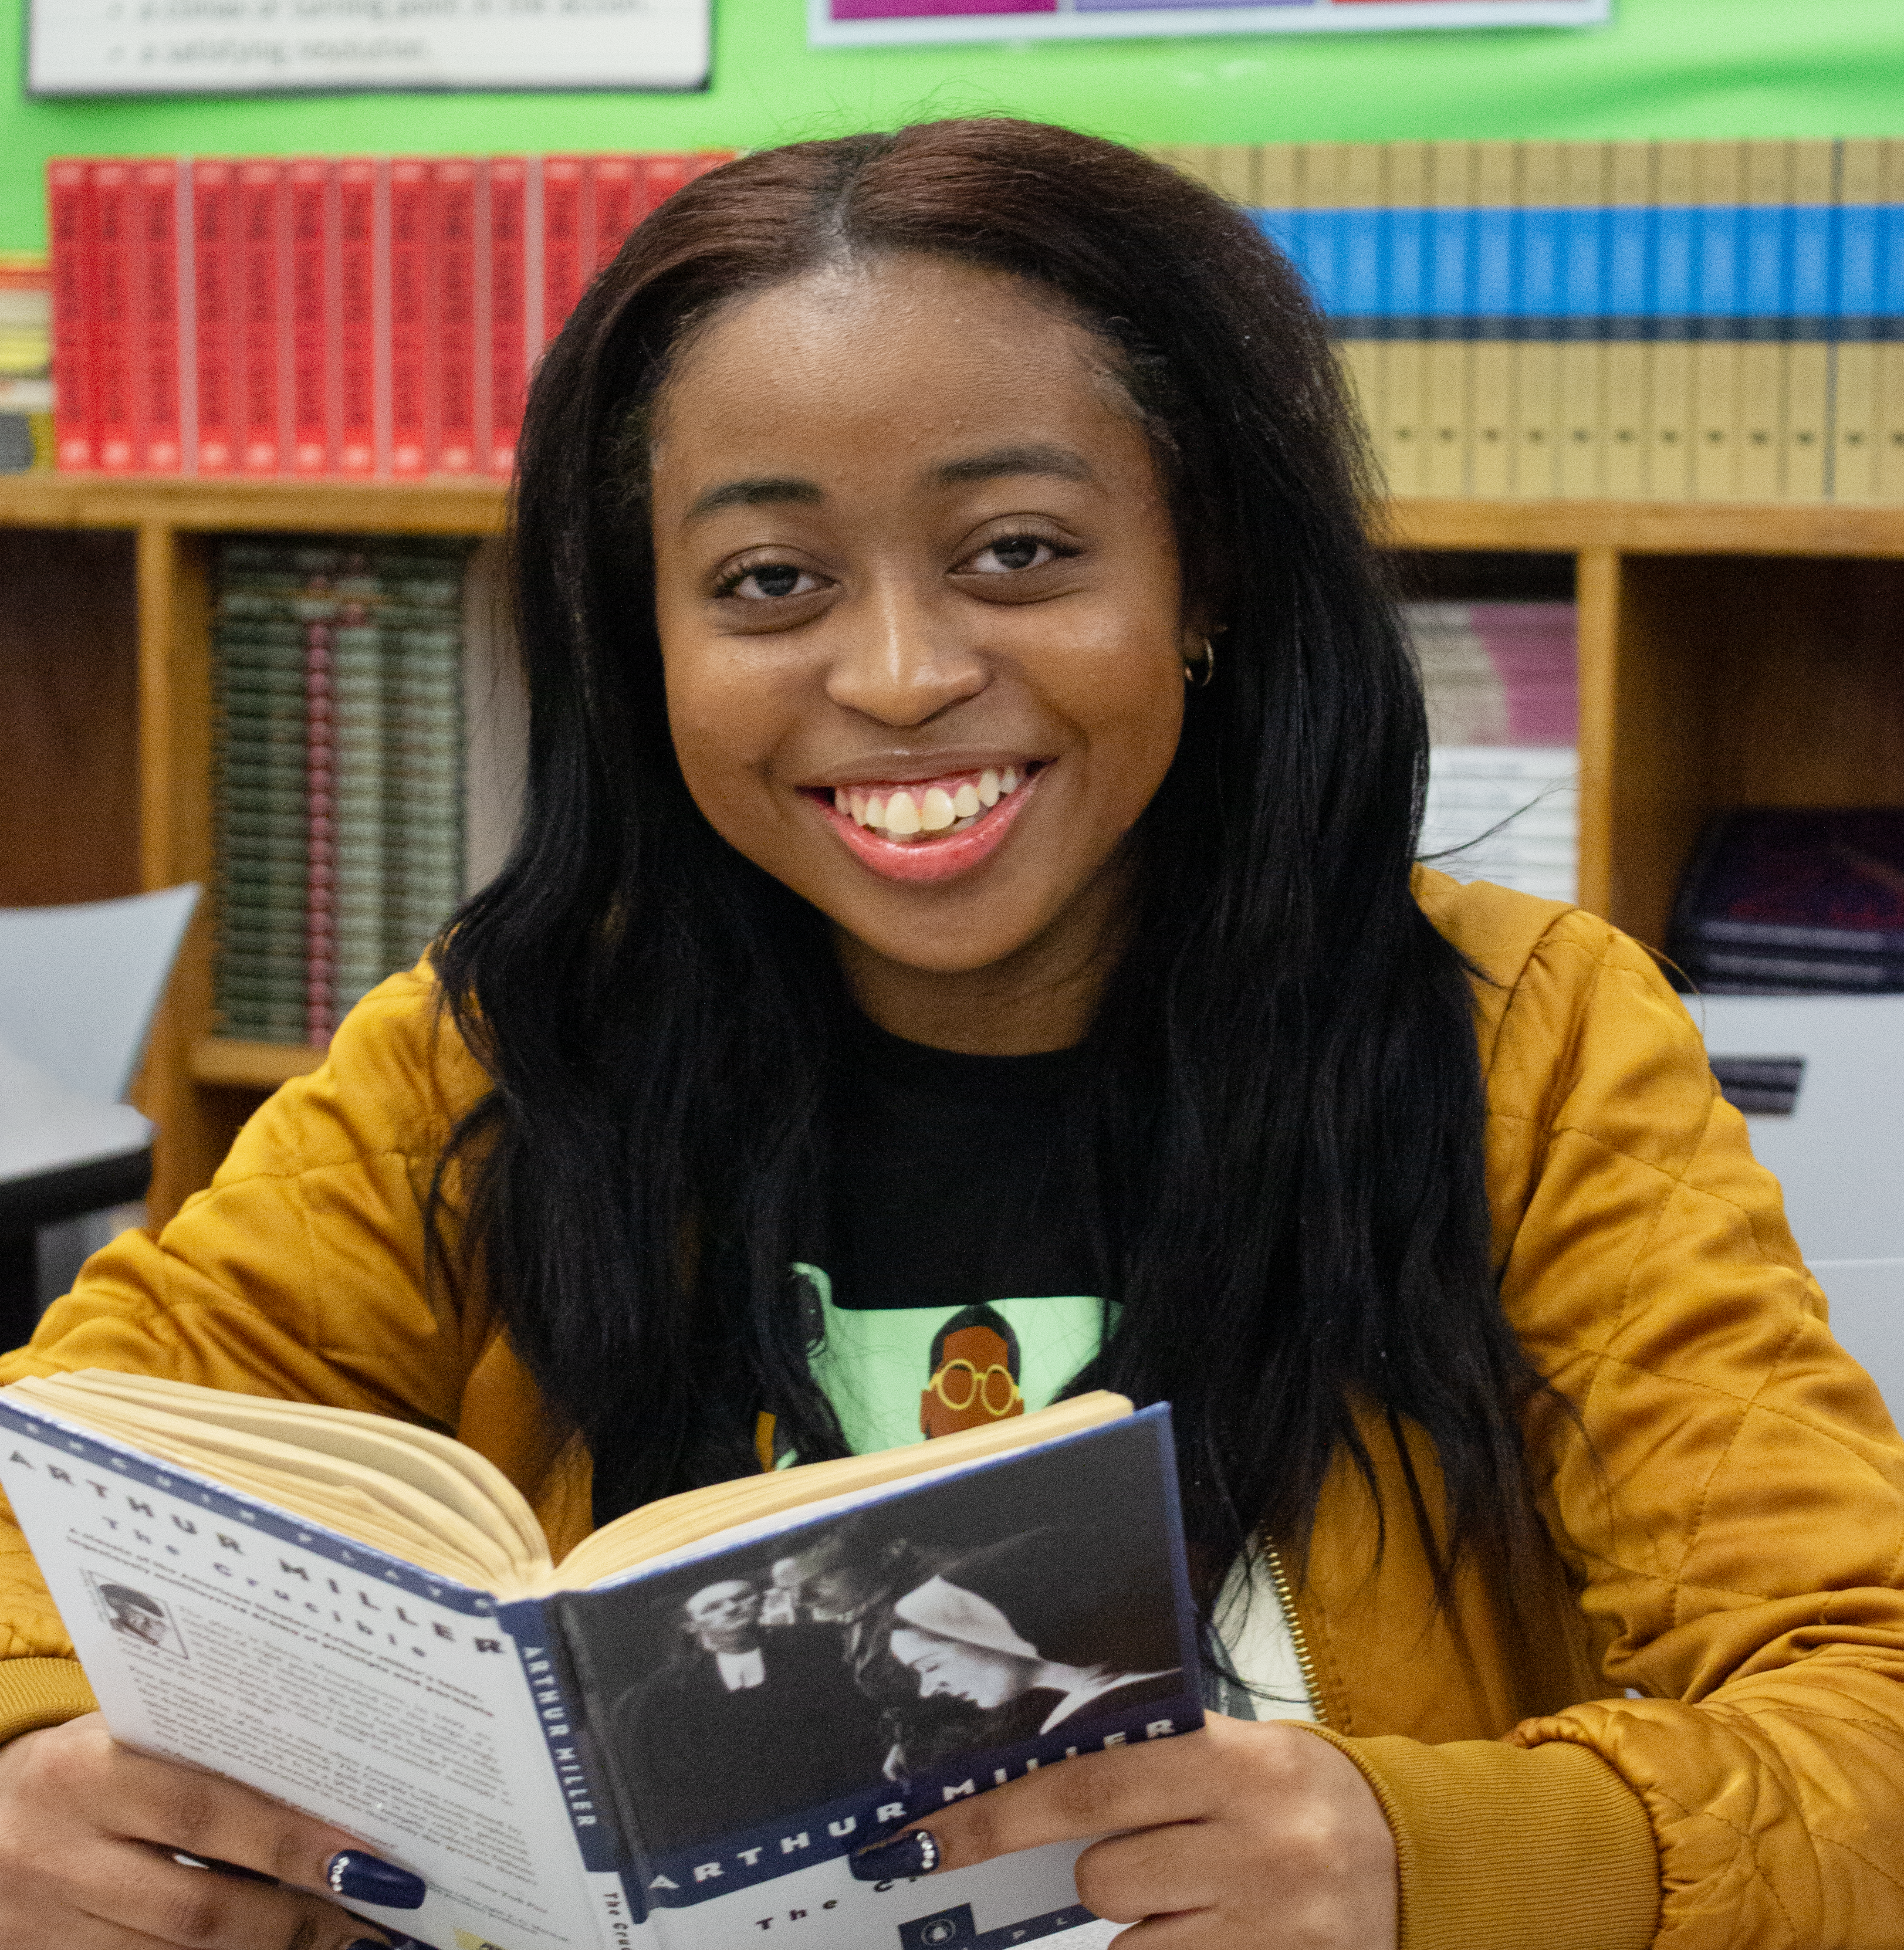 Nicole Satchell smiles while reading a book.